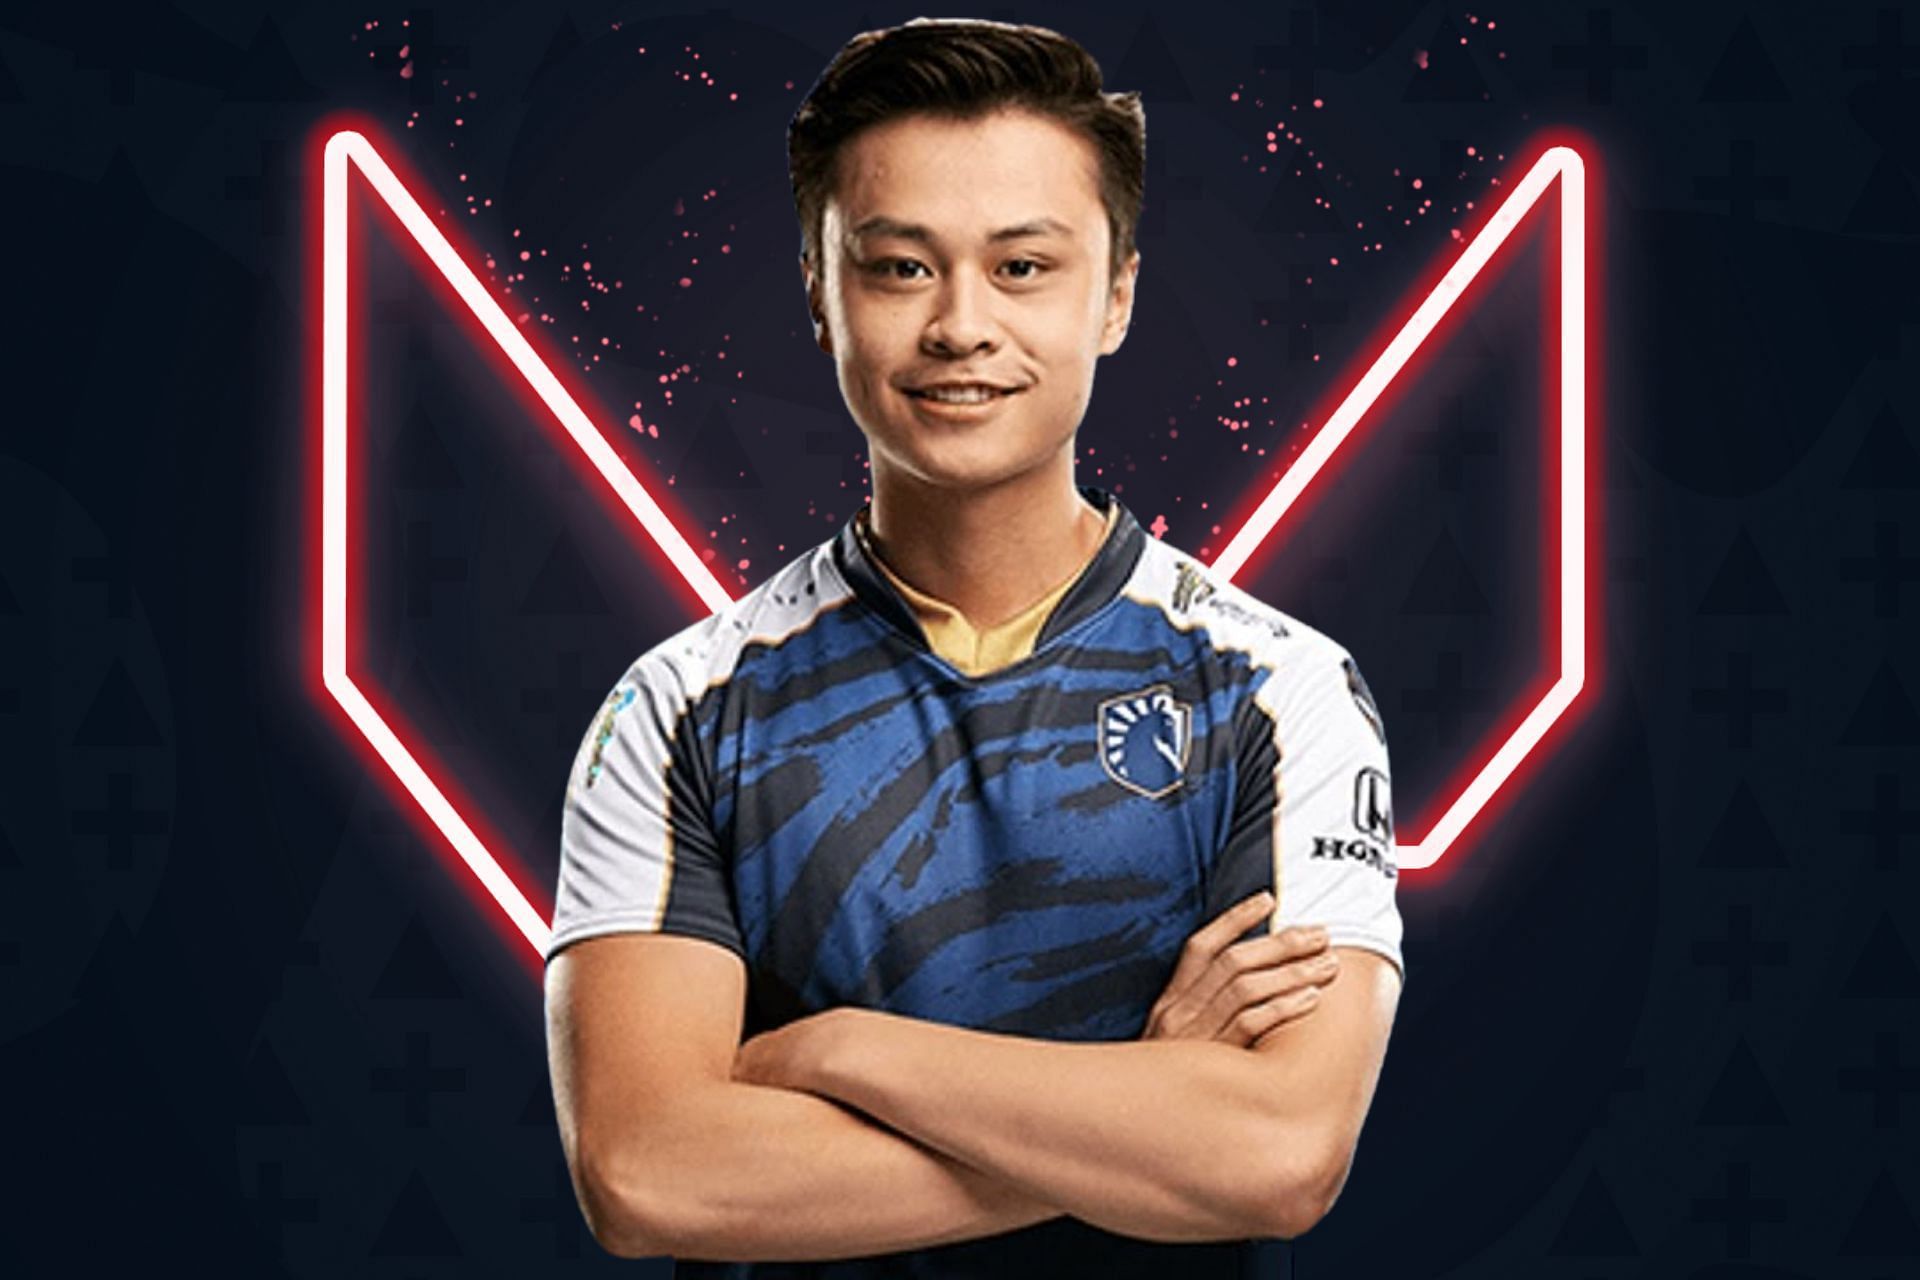 Stewie2K may shift to Valorant in the coming days (Image via Sportskeeda)